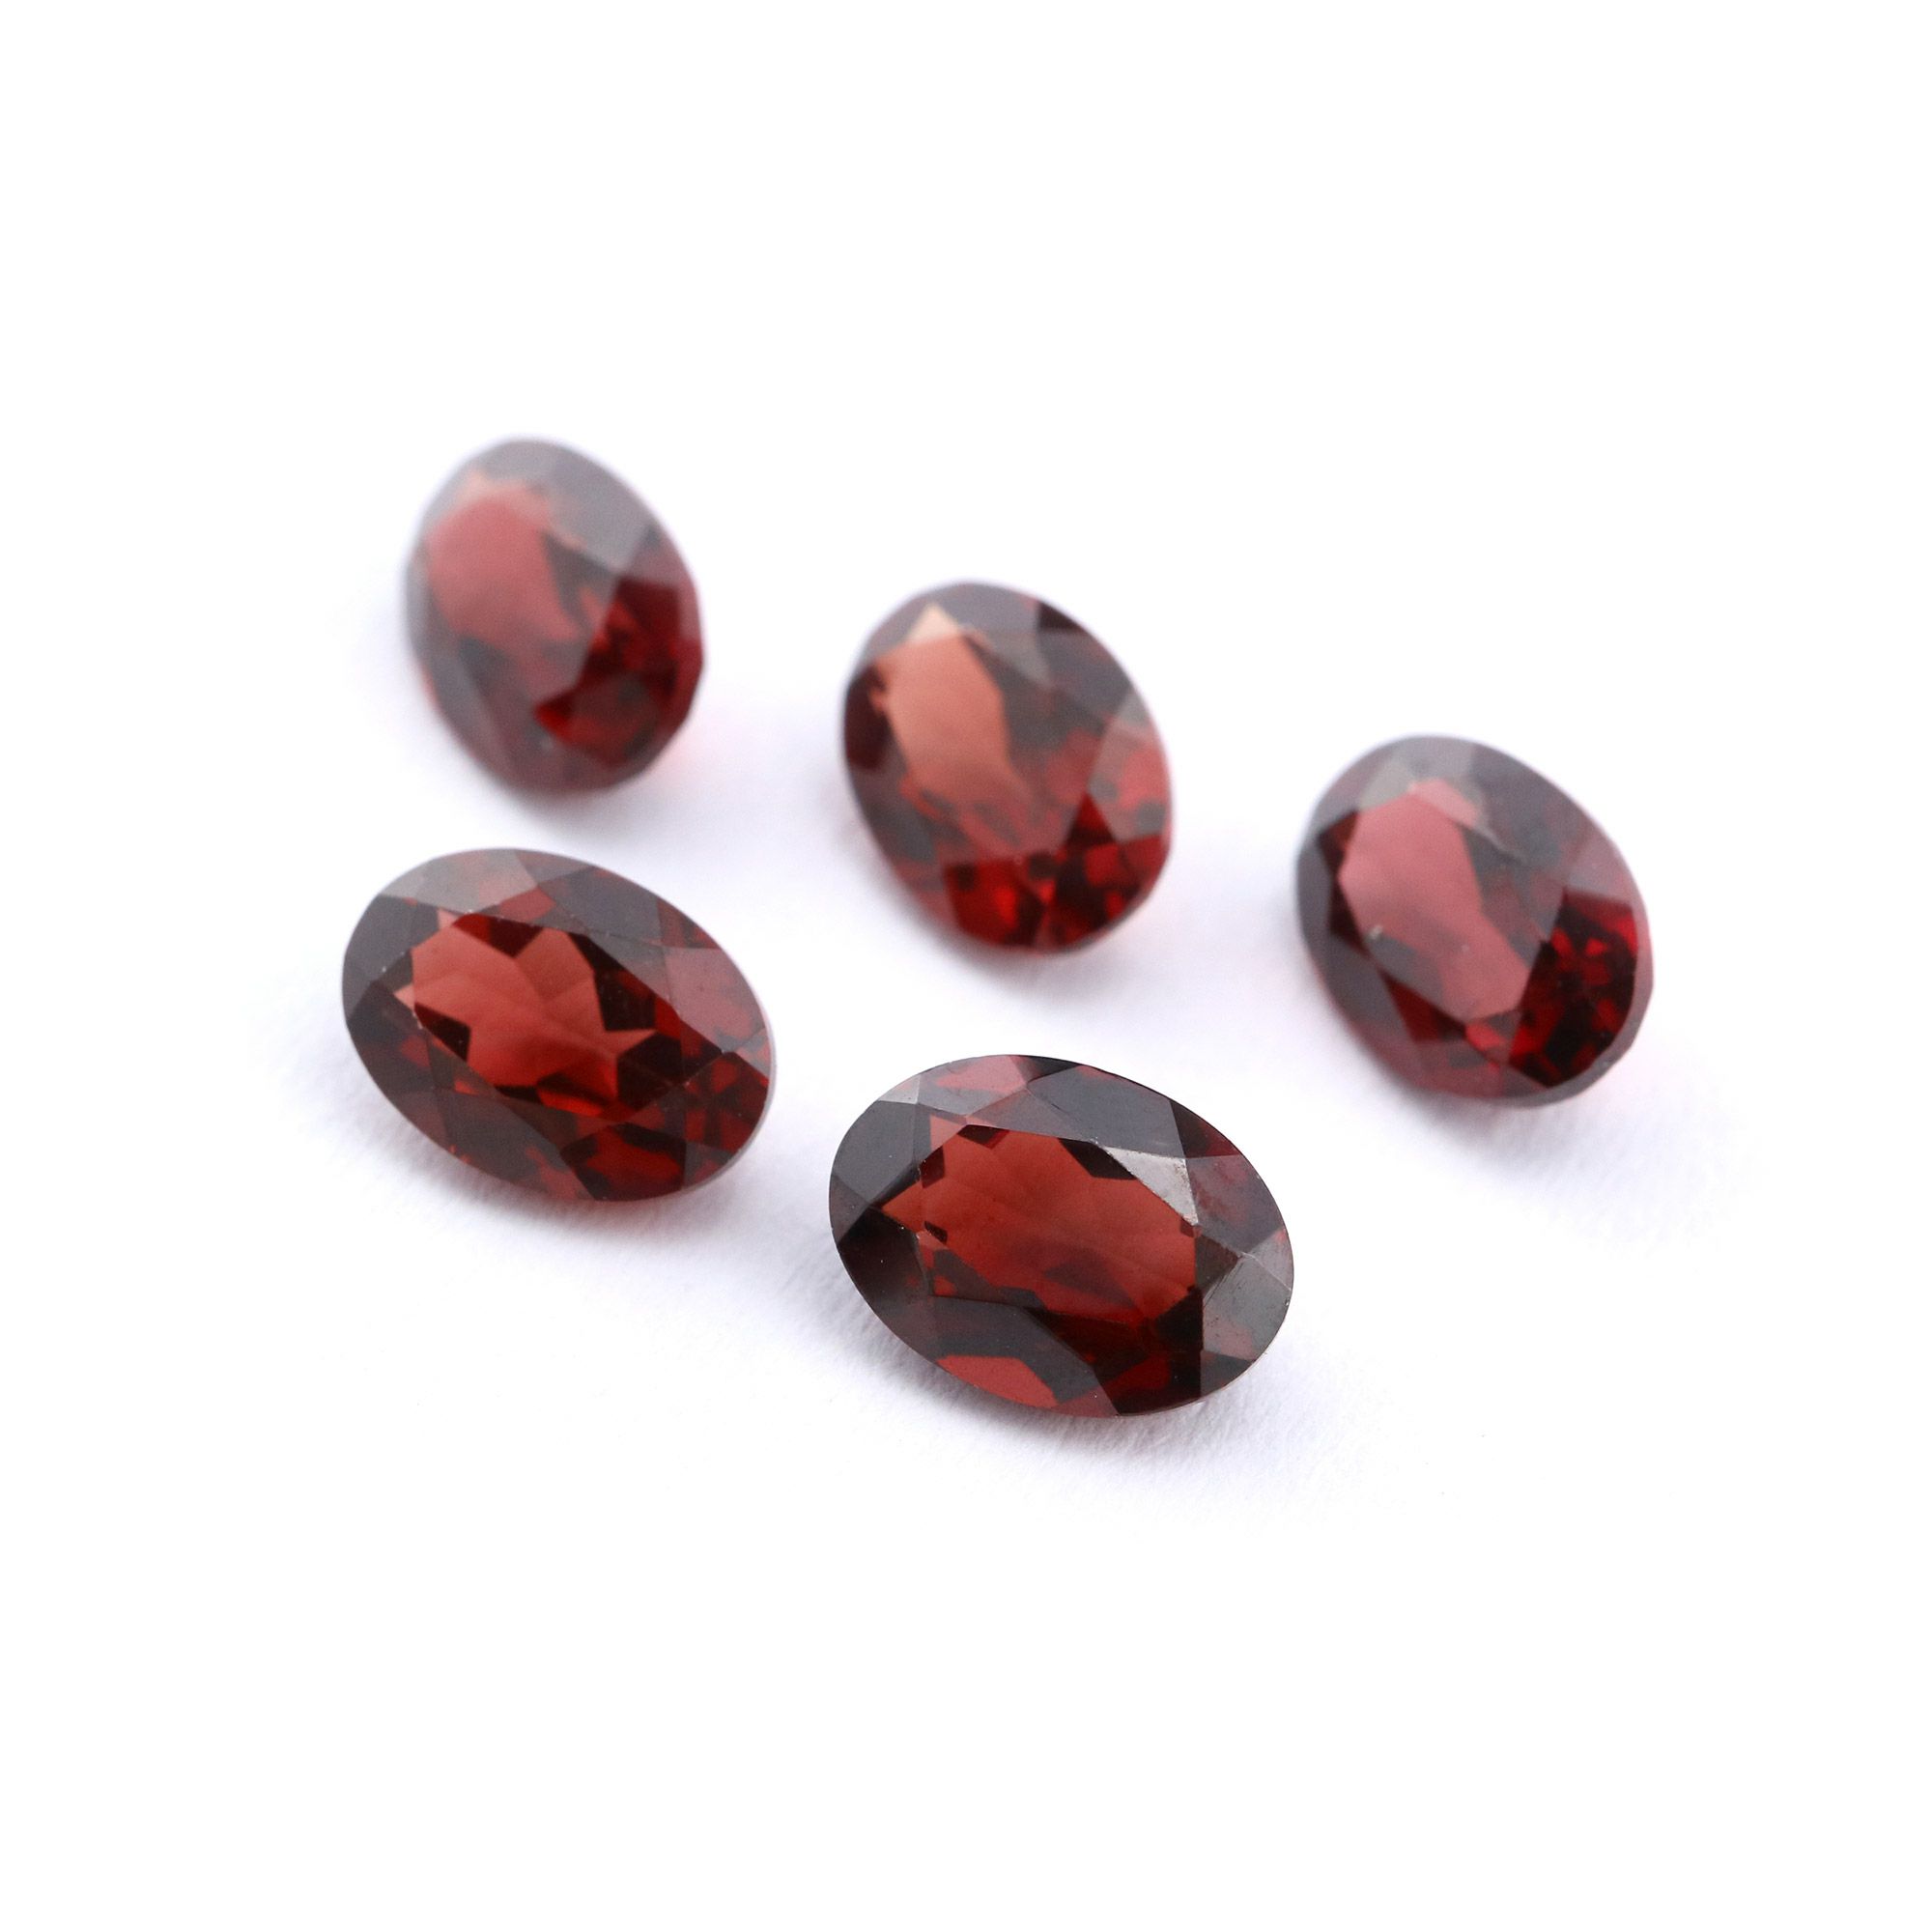 1Pcs Oval Red Garnet January Birthstone Faceted Cut Loose Gemstone Natural Semi Precious Stone DIY Jewelry Supplies 4120124 - Click Image to Close